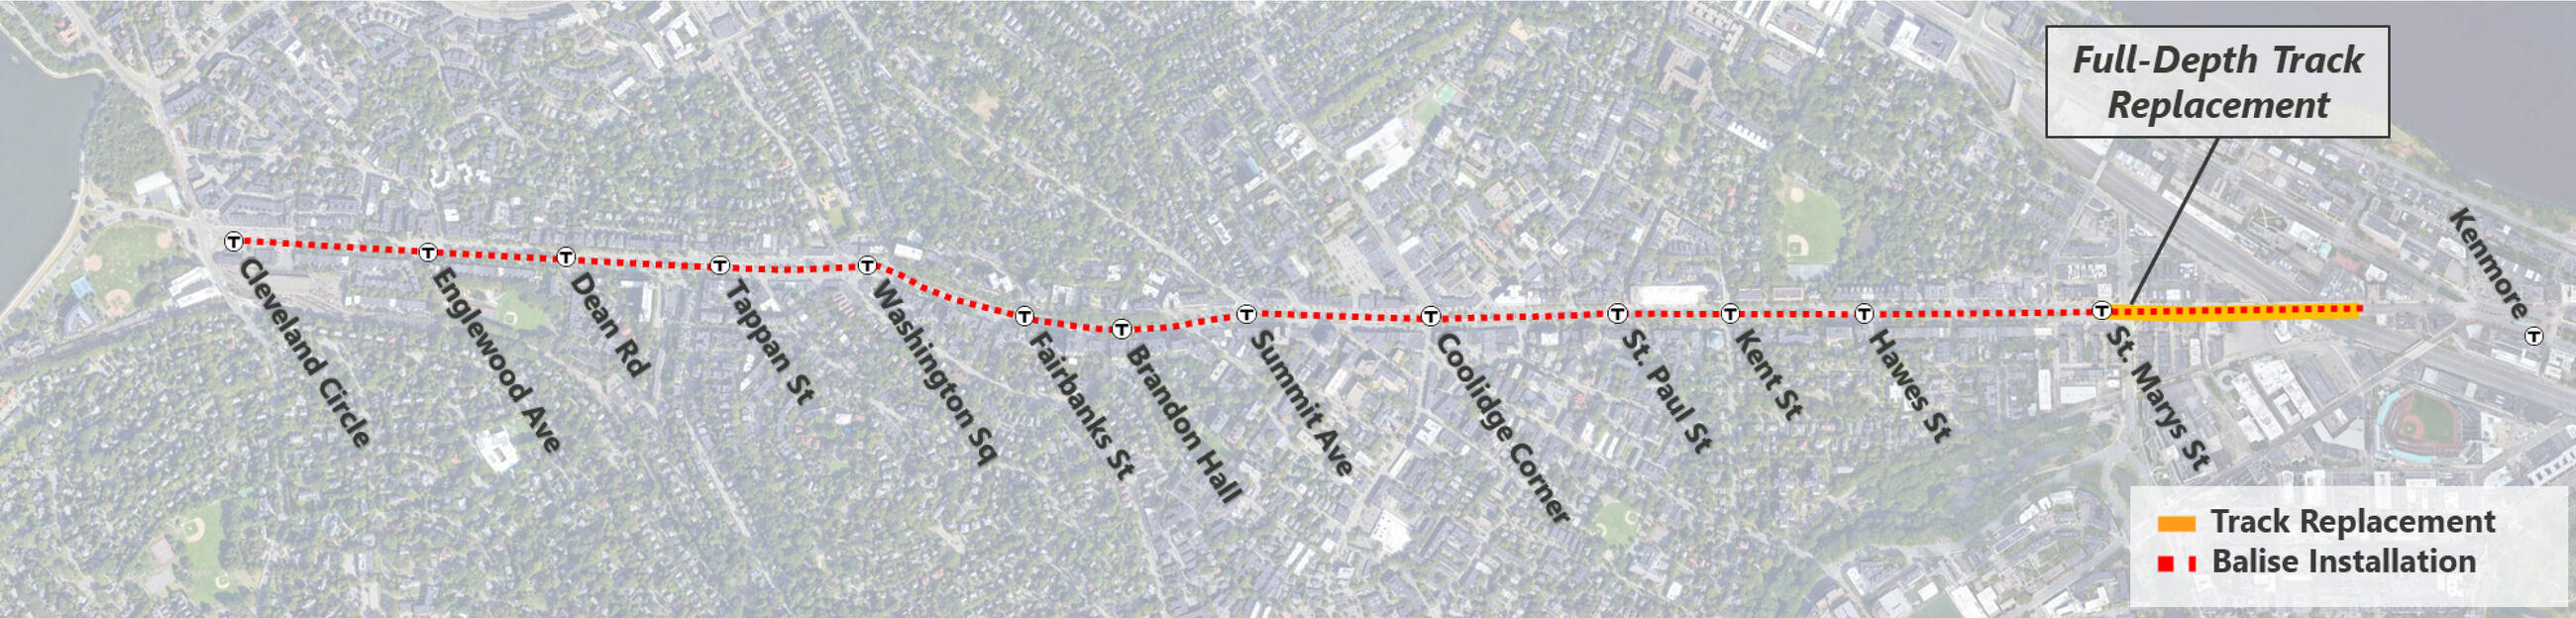 A line map showing that there will be Balise Installation from Cleveland Circle to Beacon Junction (between St Mary's Street and Kenmore) and full-depth track replacement between St Mary's Street and Beacon Junction